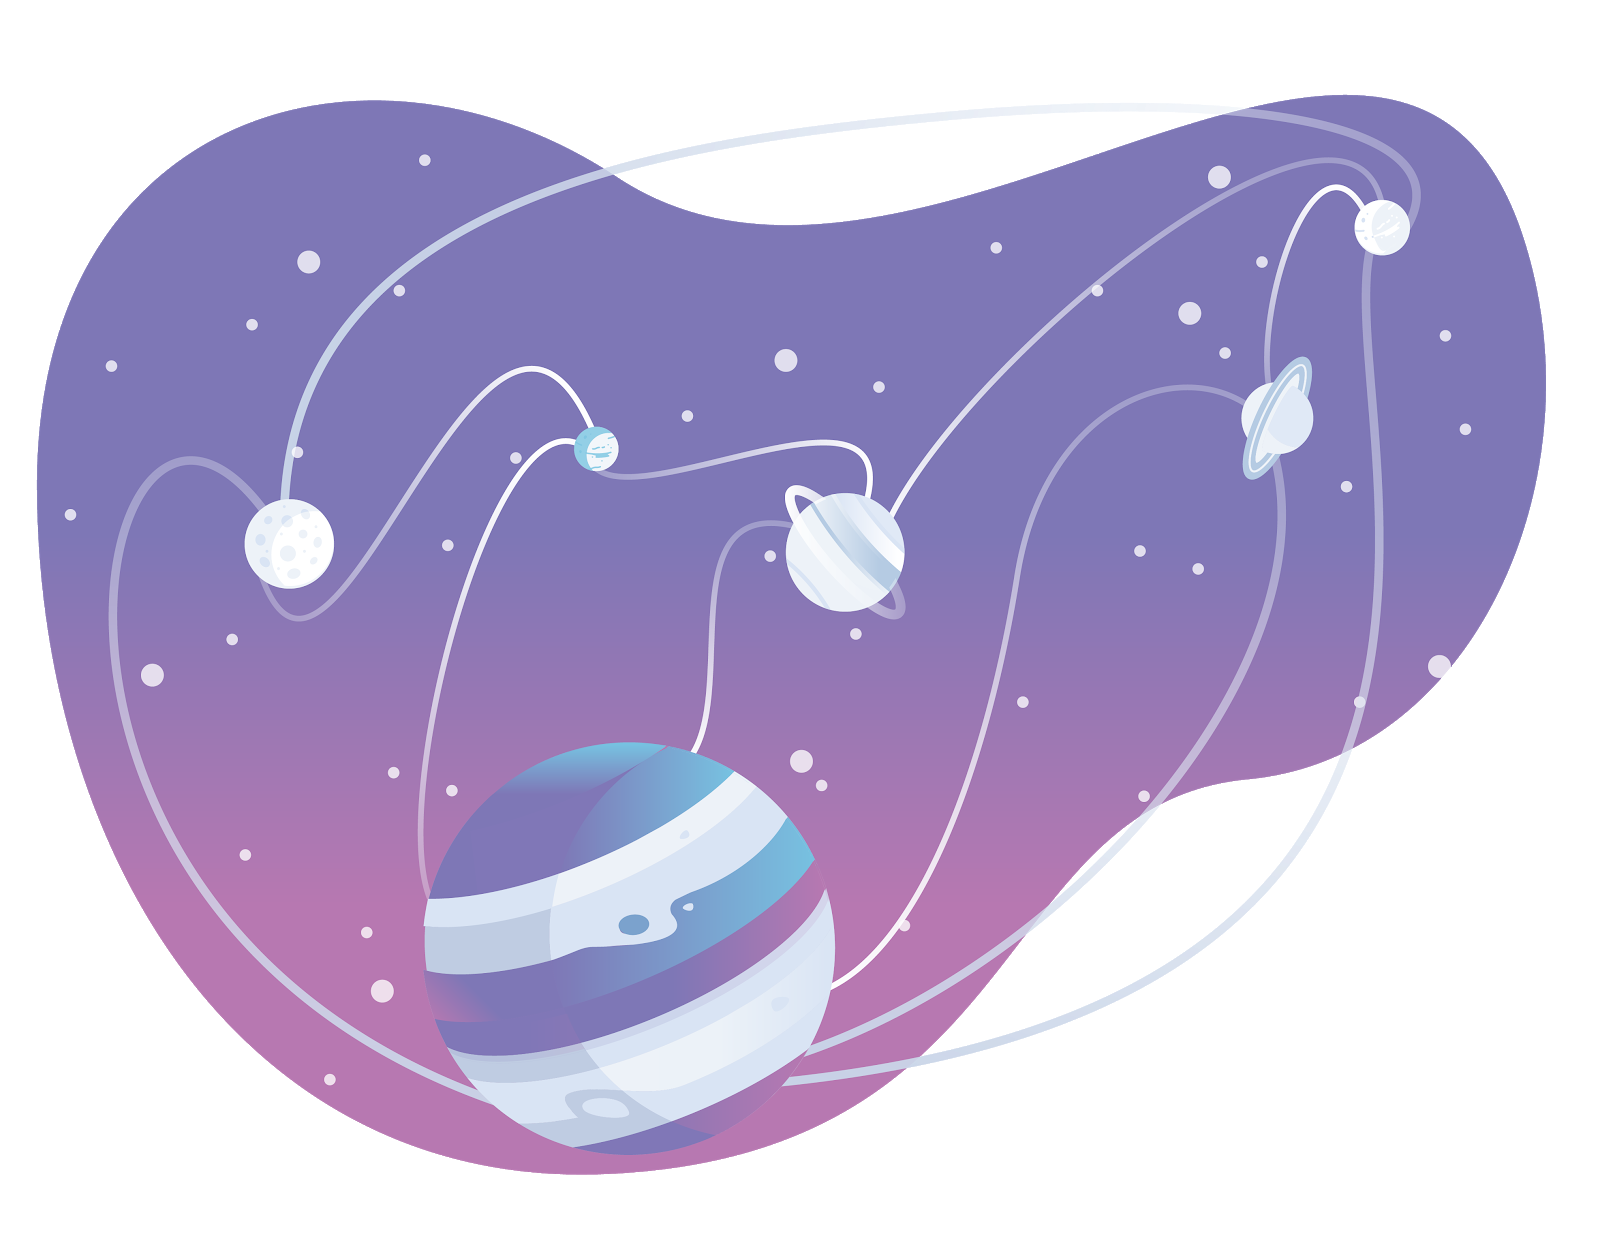 Cloudflare goes InterPlanetary - Introducing Cloudflare’s IPFS Gateway